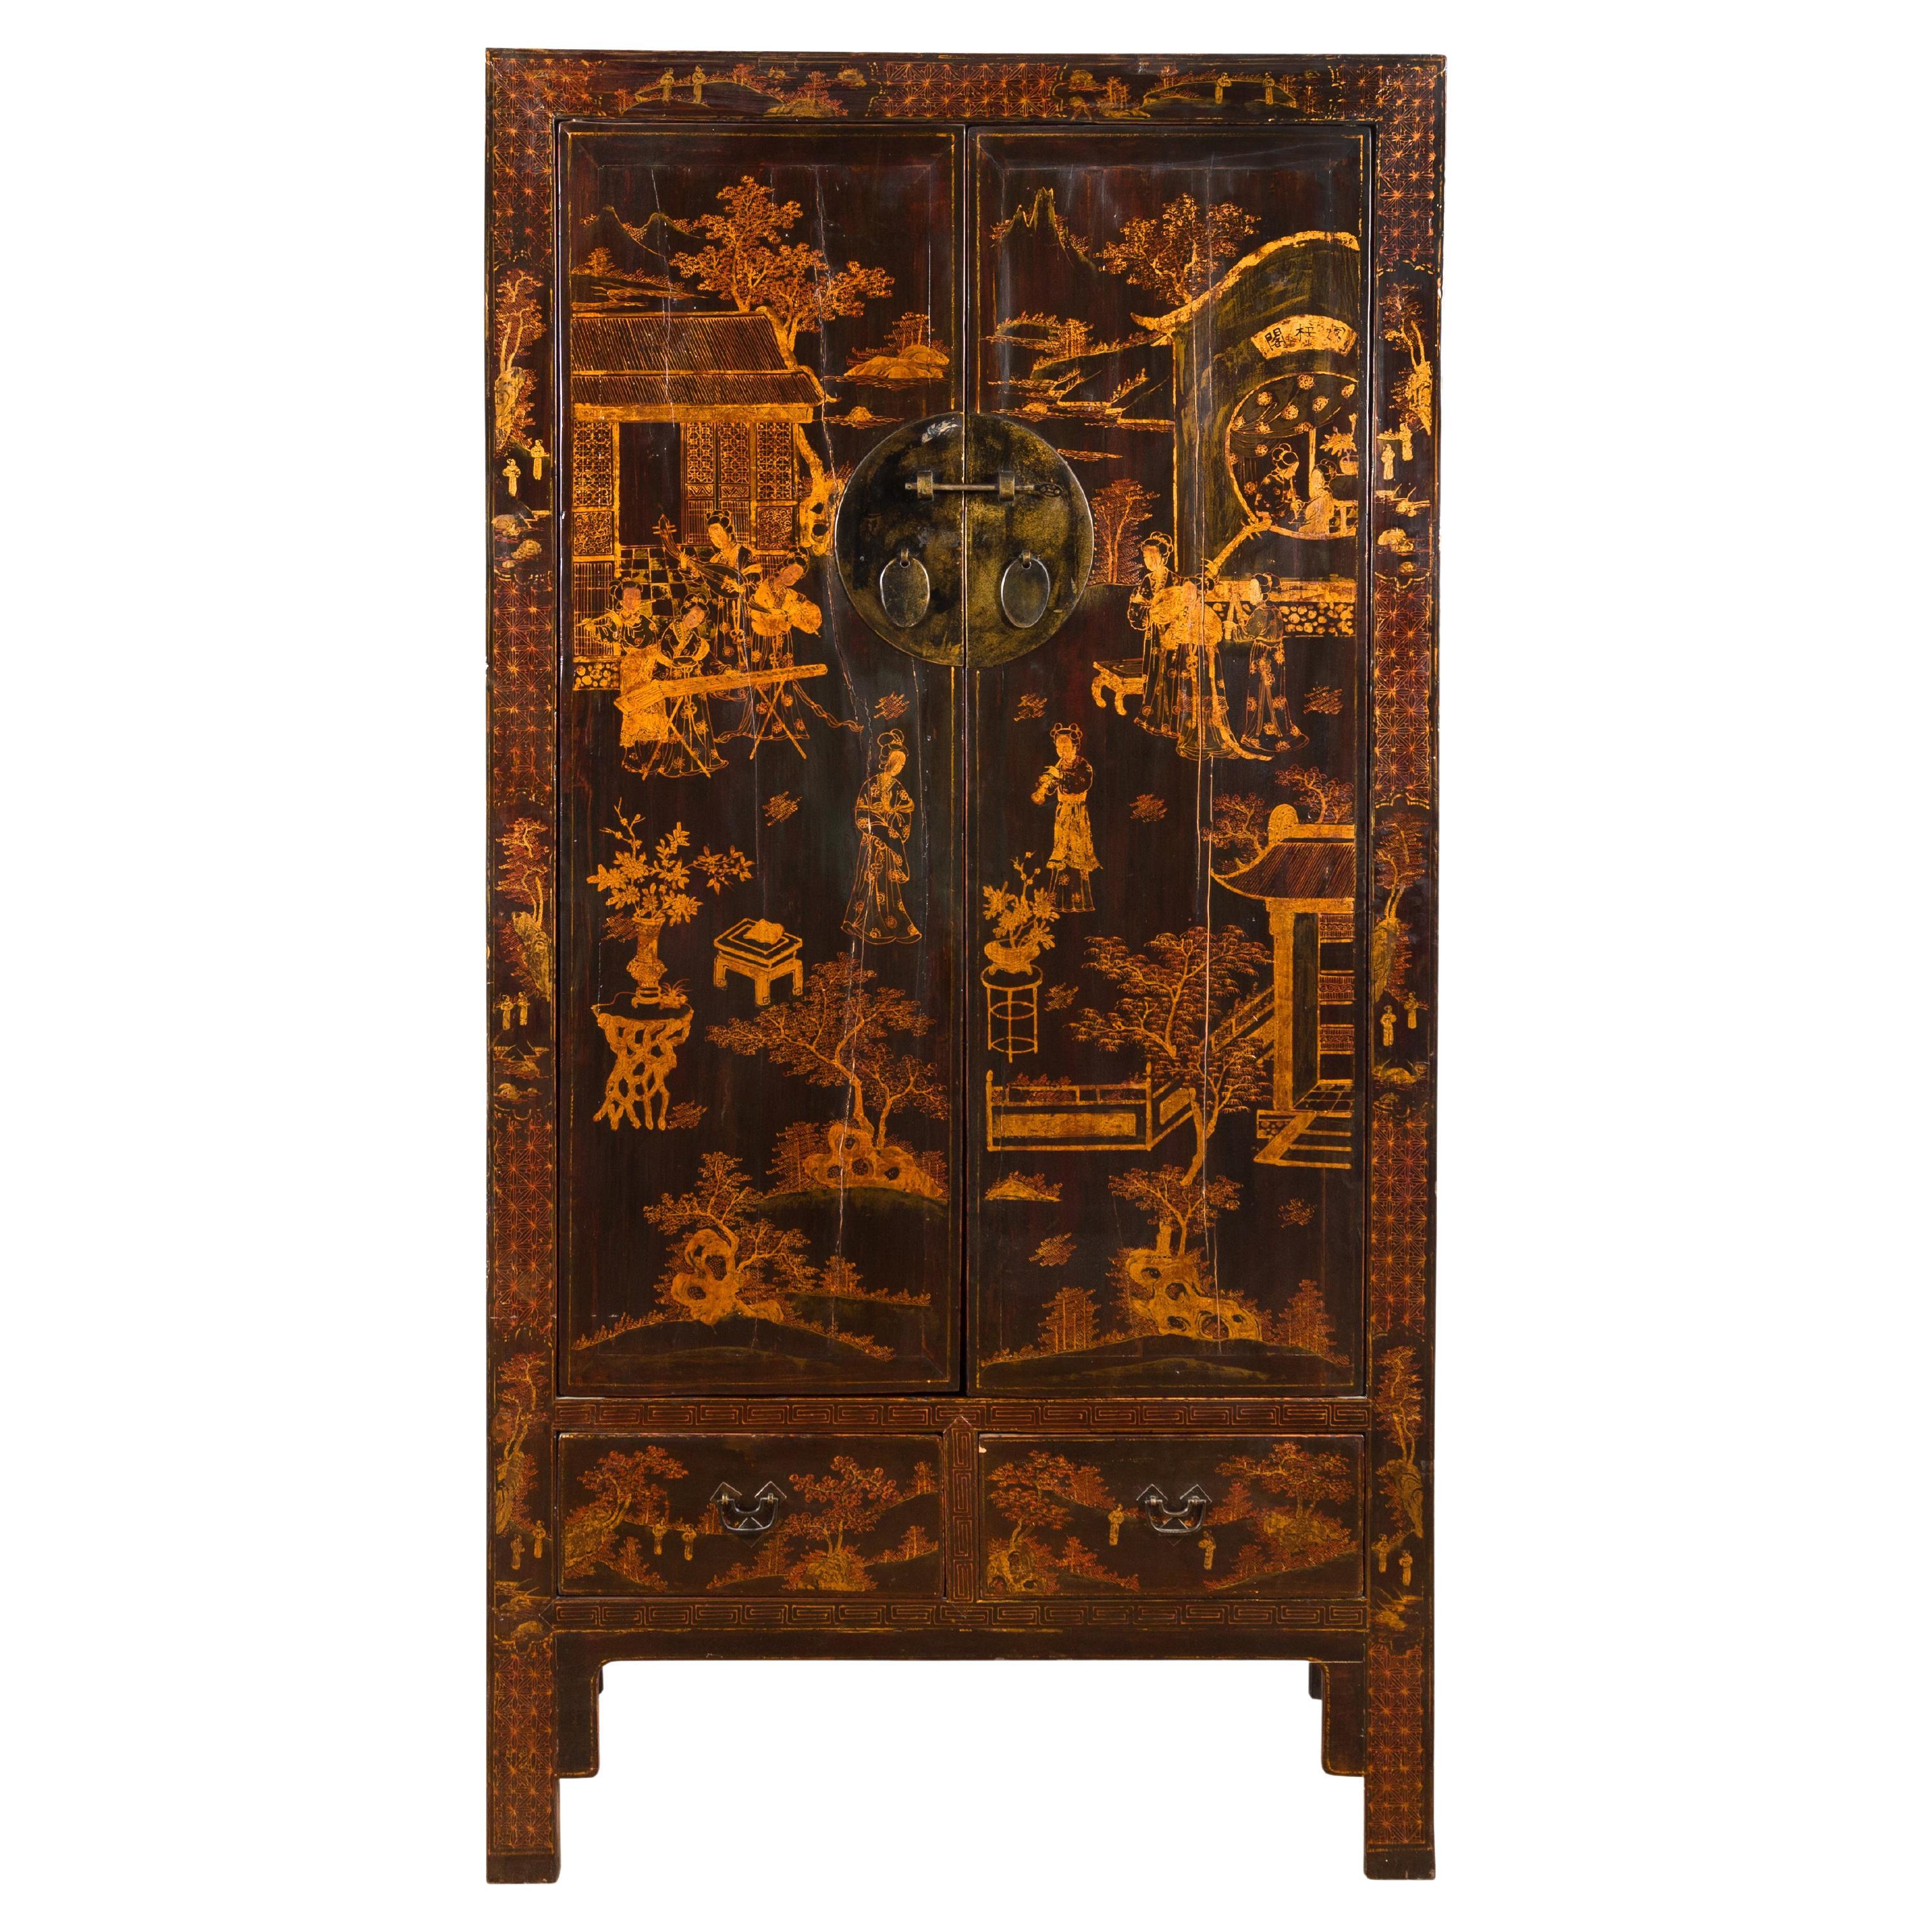 Qing Dynasty Chinese 19th Century Cabinet with Gilt Hand-Painted Musical Scenes